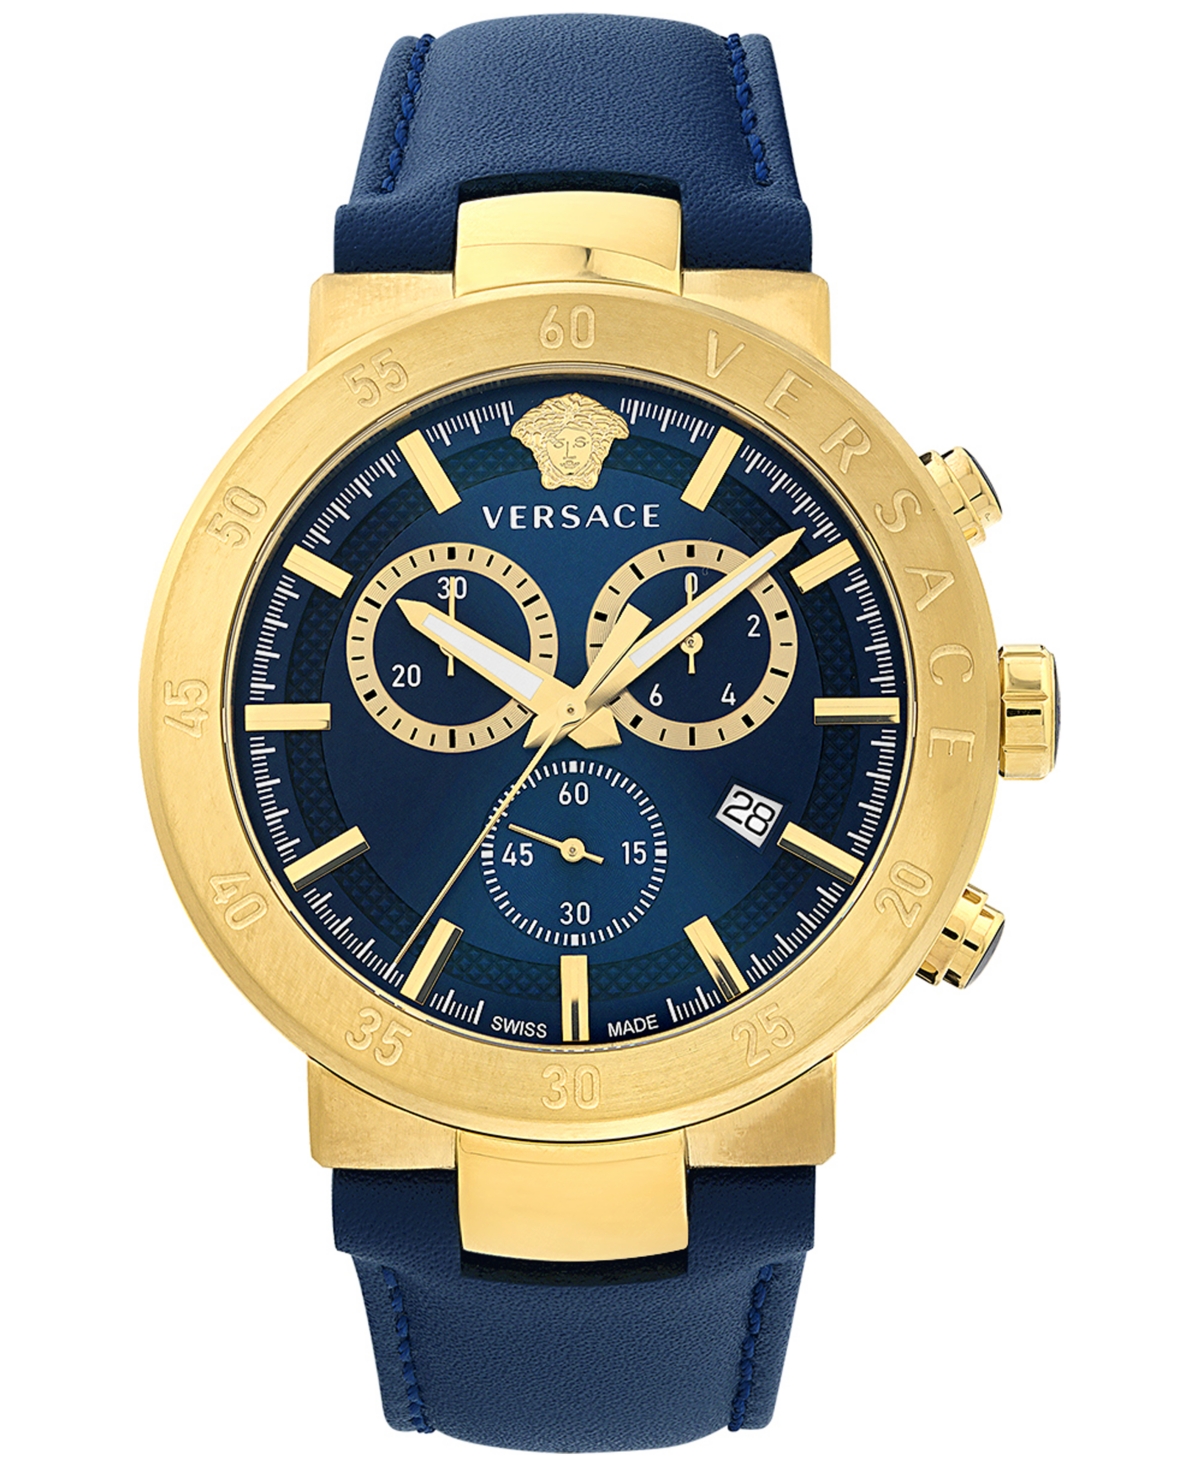 Versace Men's Swiss Chronograph Urban Mystique Blue Leather Strap Watch 43mm In Gold